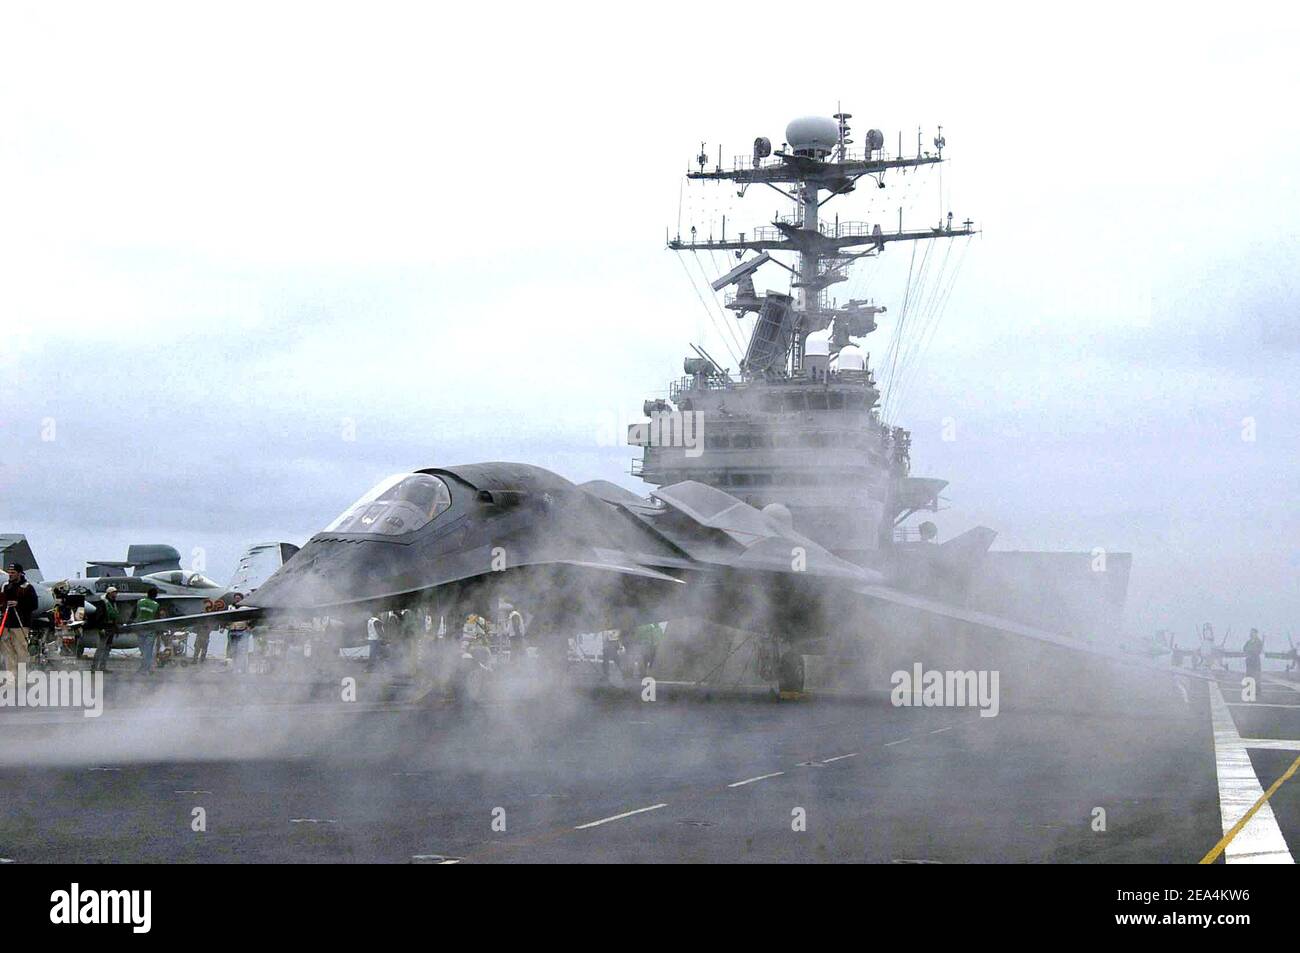 'The ficticious aircraft from the upcoming movie ''Stealth'' prepares to launch during a scene filmed for the upcoming movie ''Stealth'' on the flight deck of USS Abraham Lincoln on June 18, 2004. Photo by USN via ABACAPRESS.COM' Stock Photo